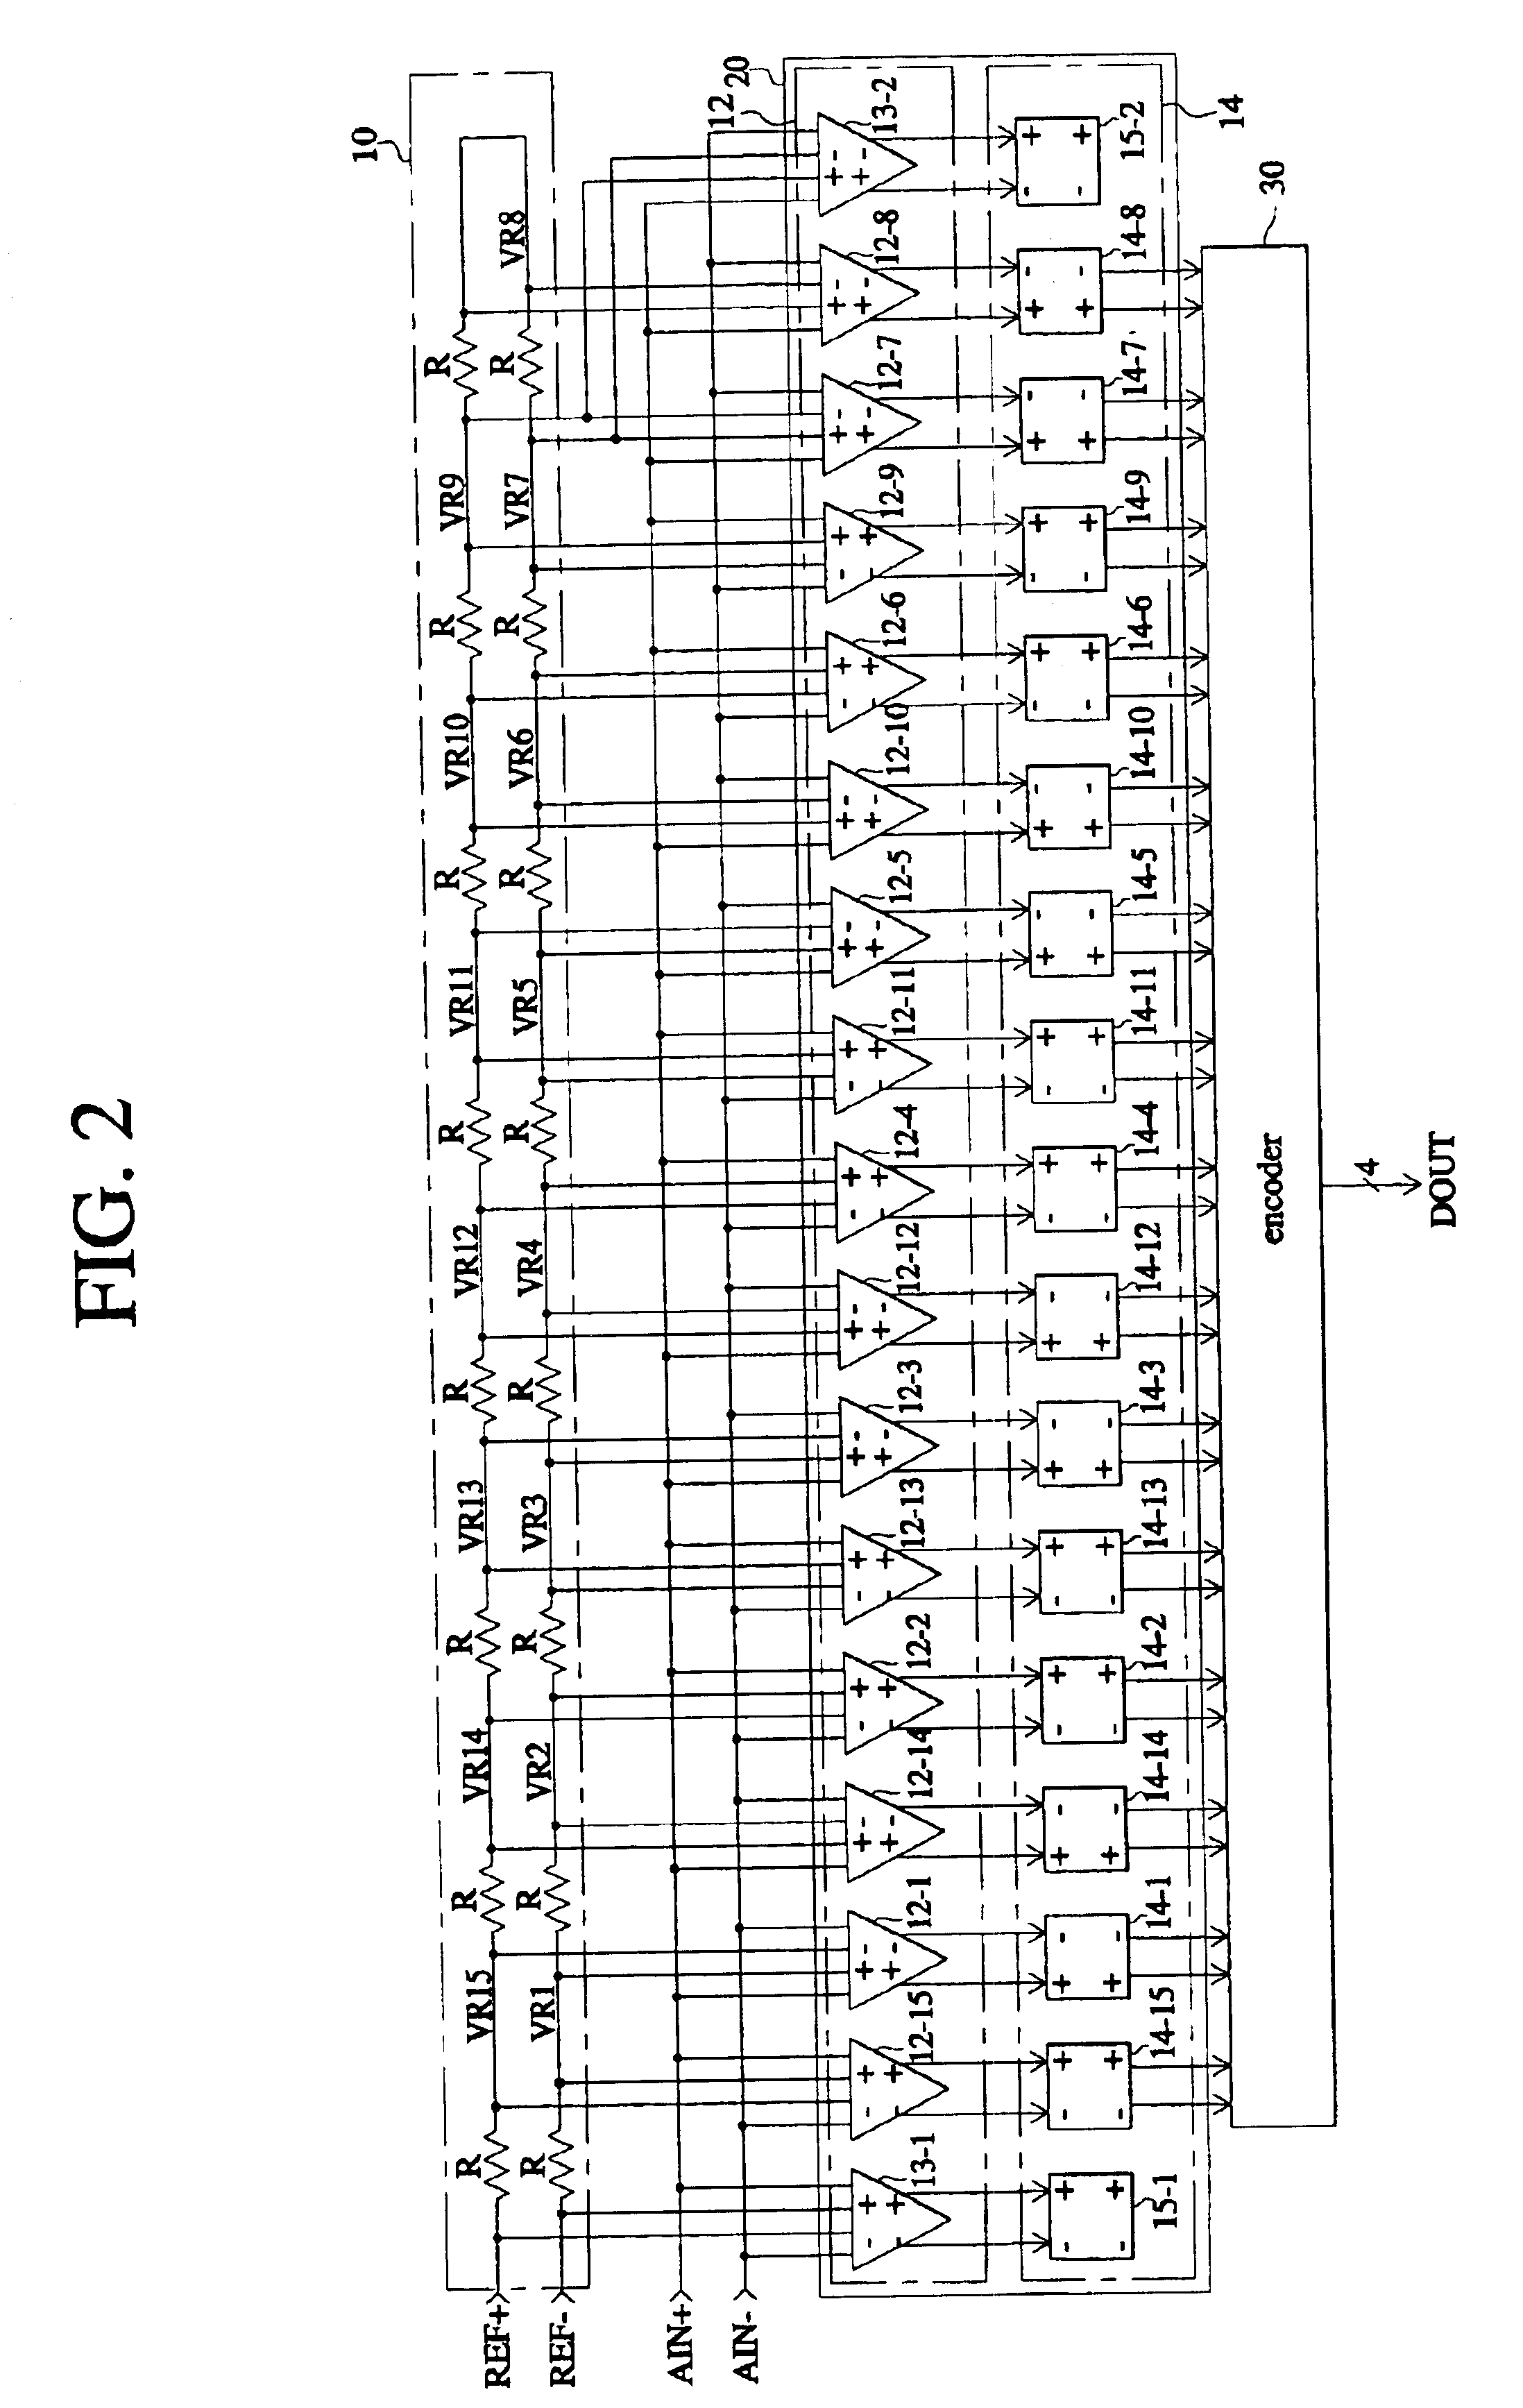 Layout method of a comparator array for flash type analog to digital converting circuit